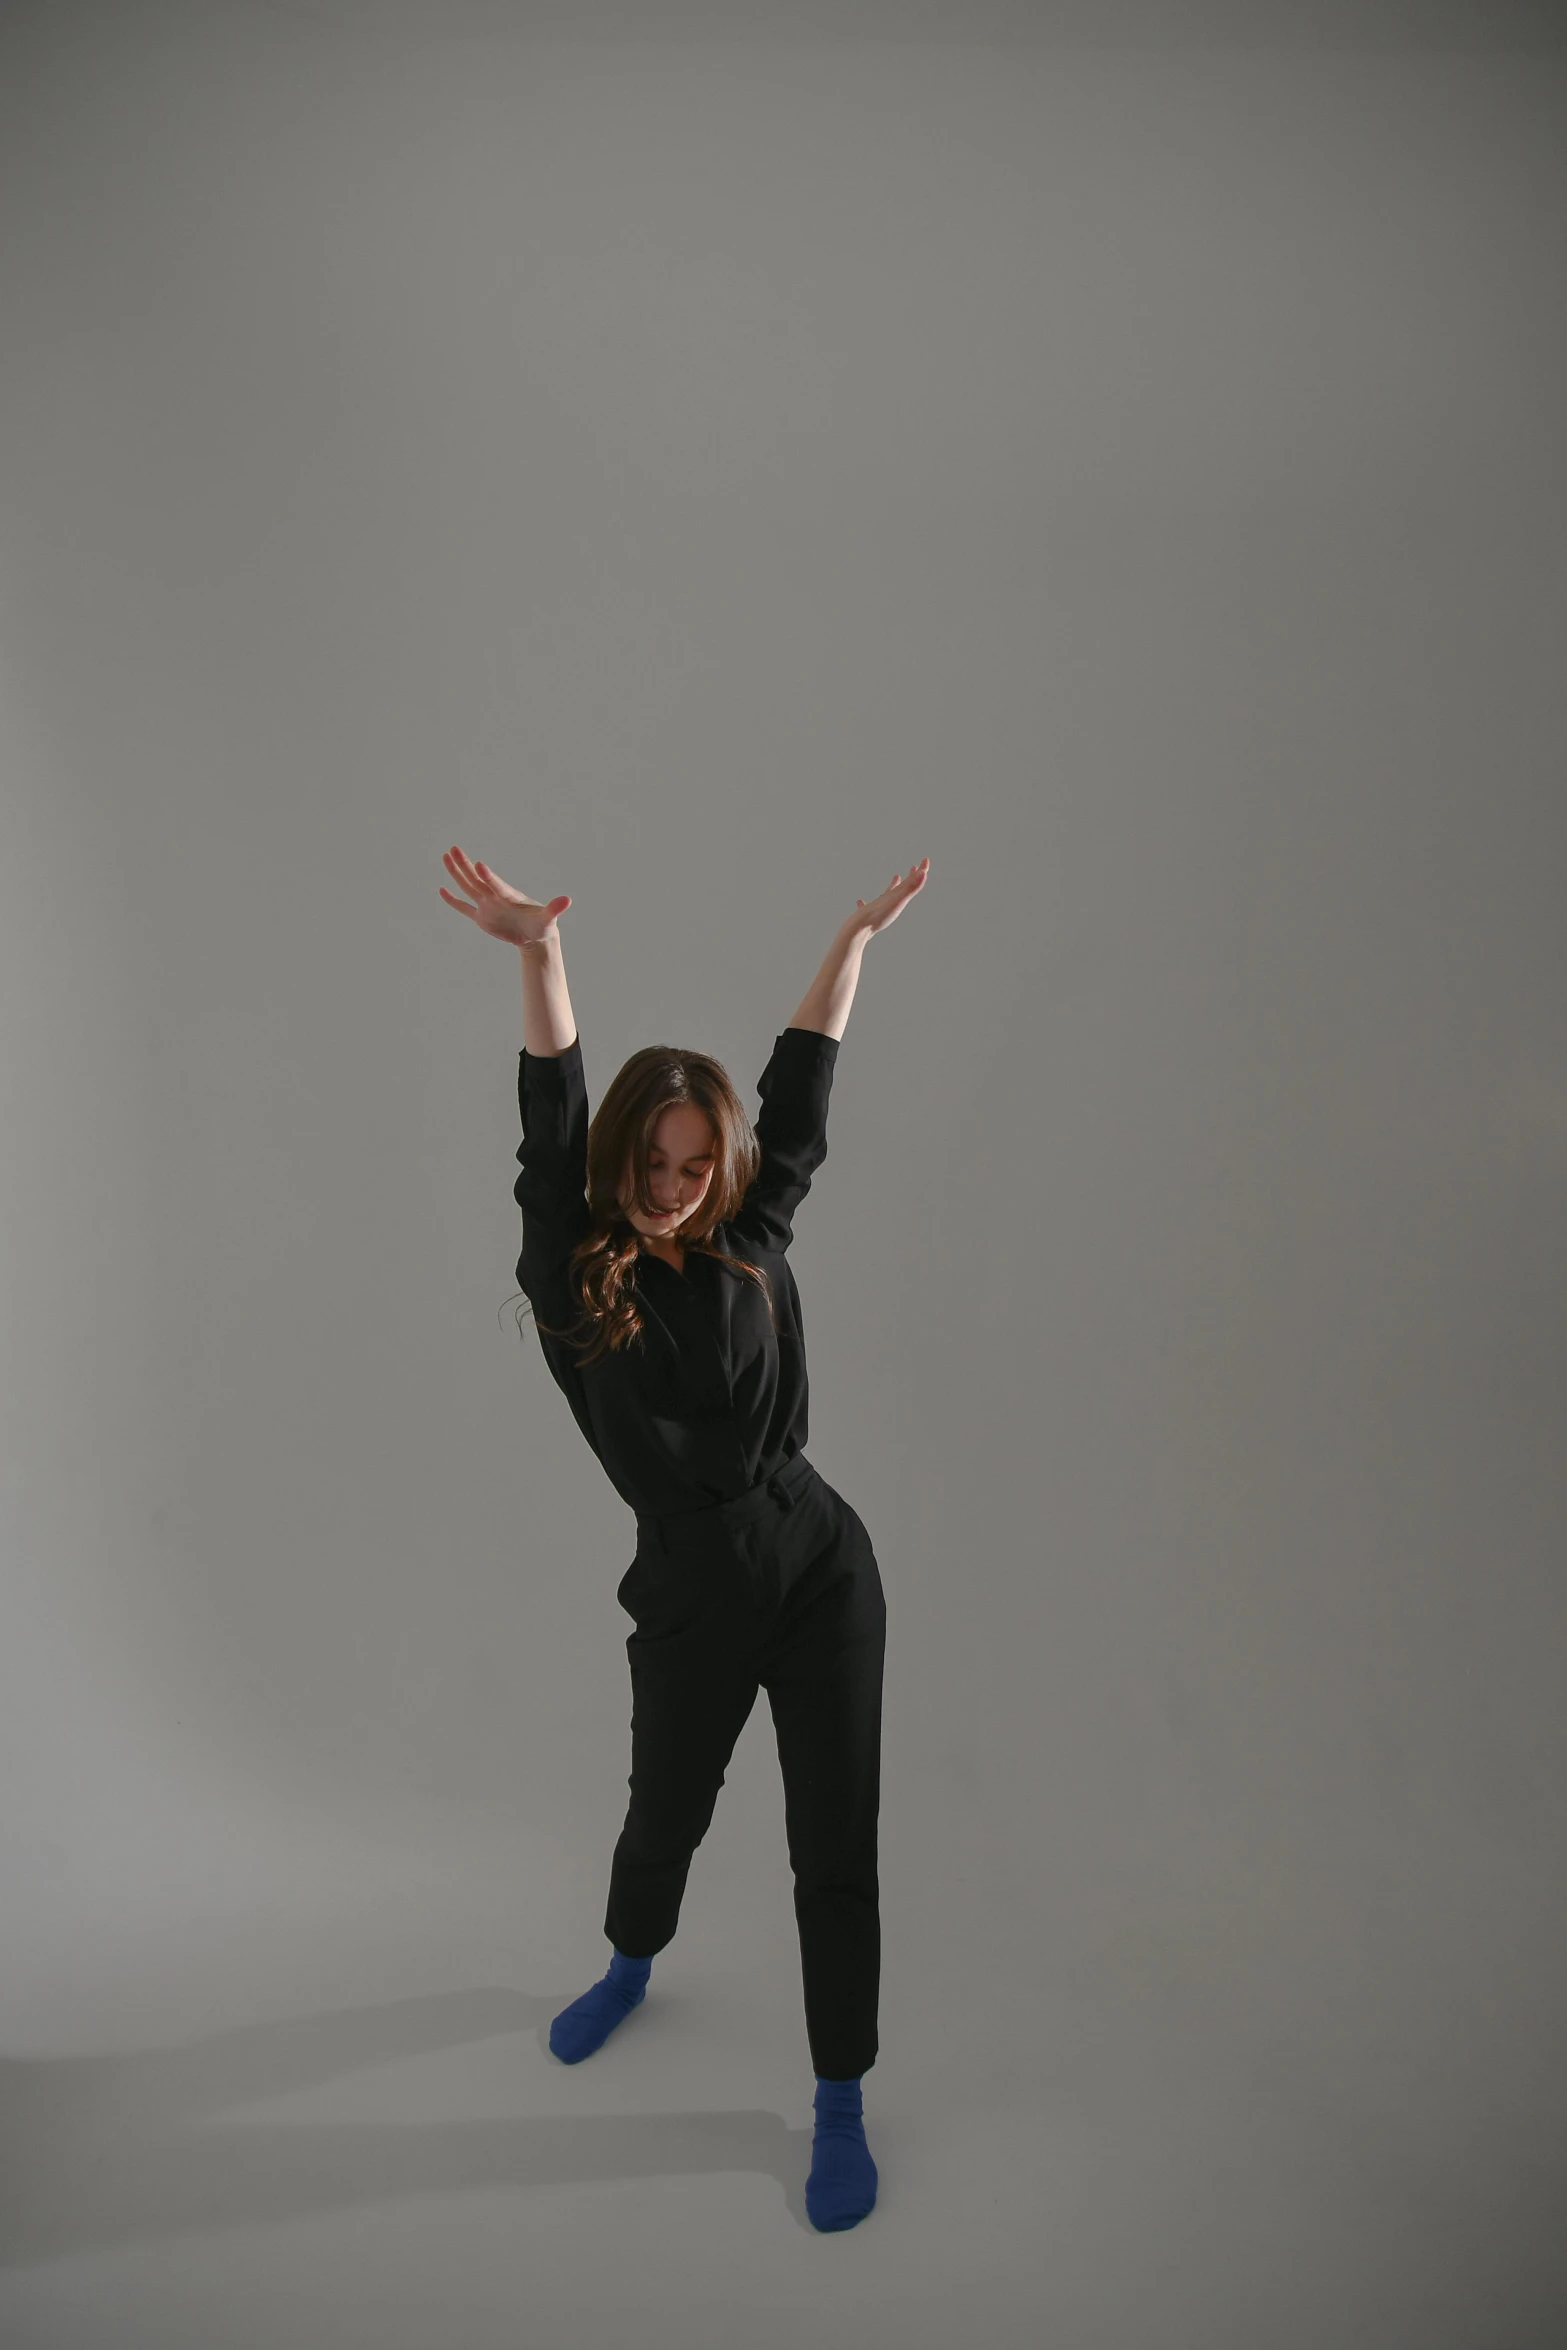 a woman in a black shirt and blue socks, an album cover, inspired by Elizabeth Polunin, unsplash, arabesque, pose(arms up + happy), in a photo studio, wearing a track suit, girl in suit